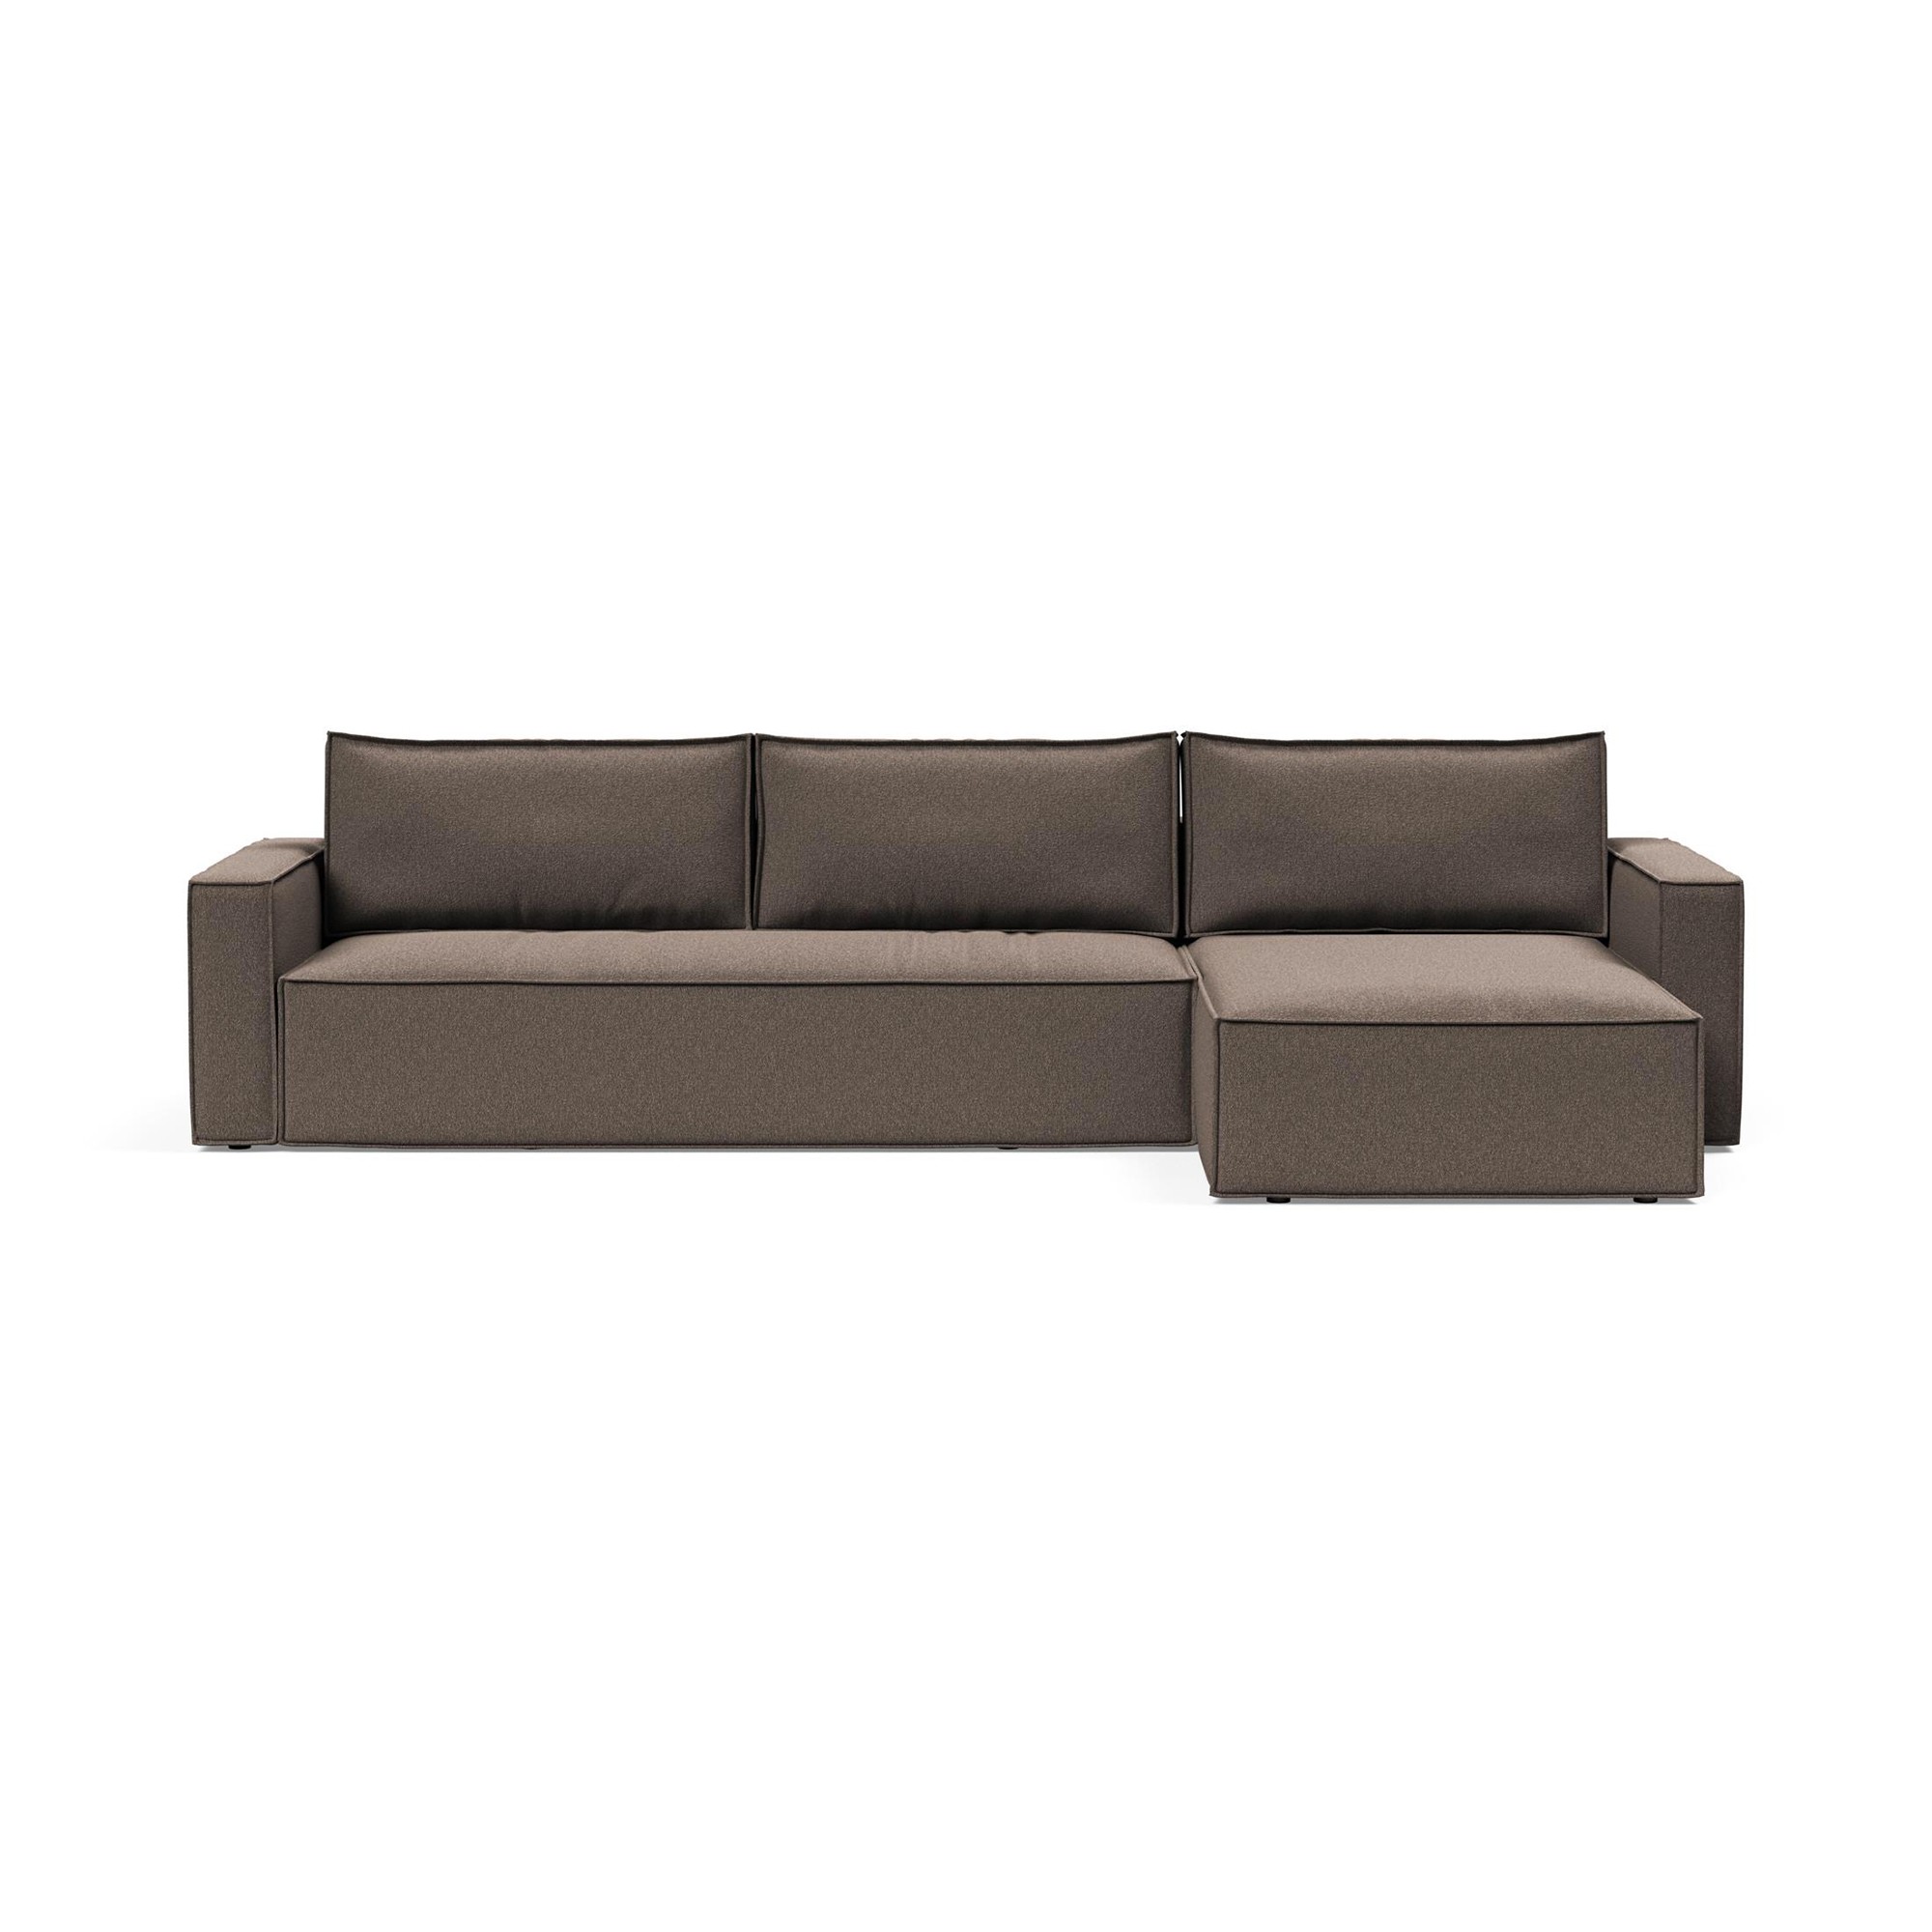 Lounger sofa bed - LIVING